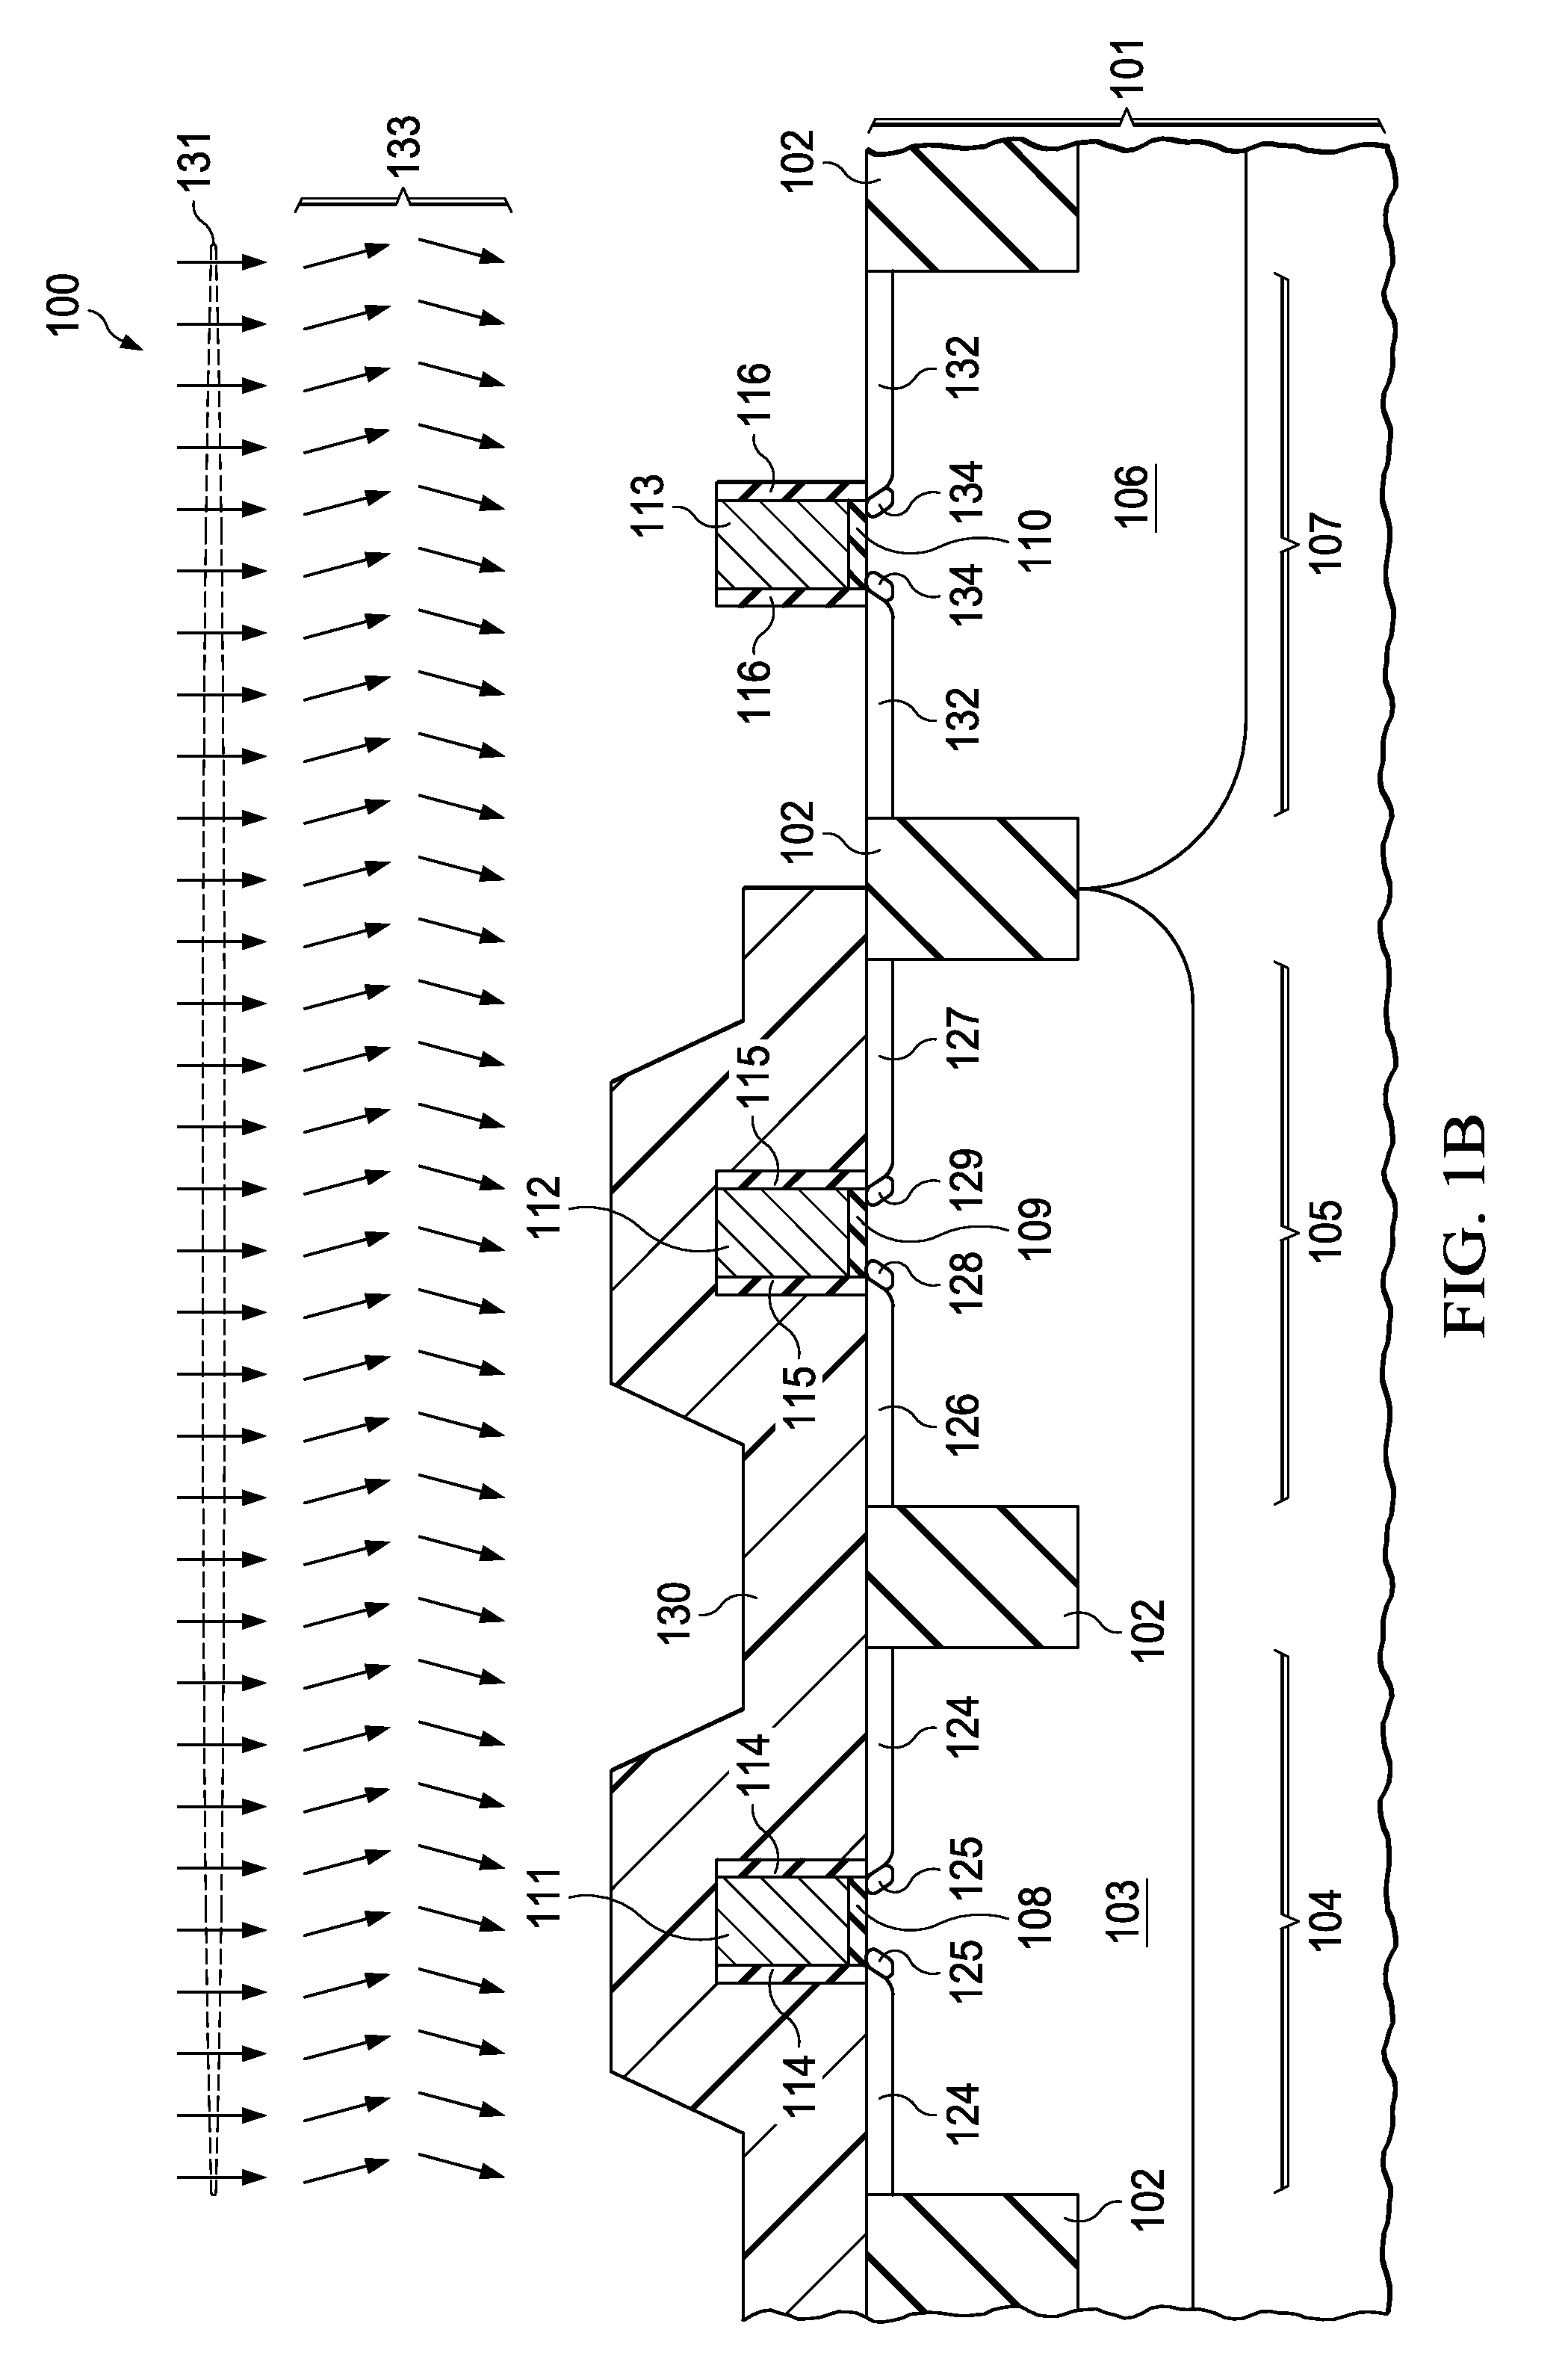 Quantum electro-optical device using CMOS transistor with reverse polarity drain implant